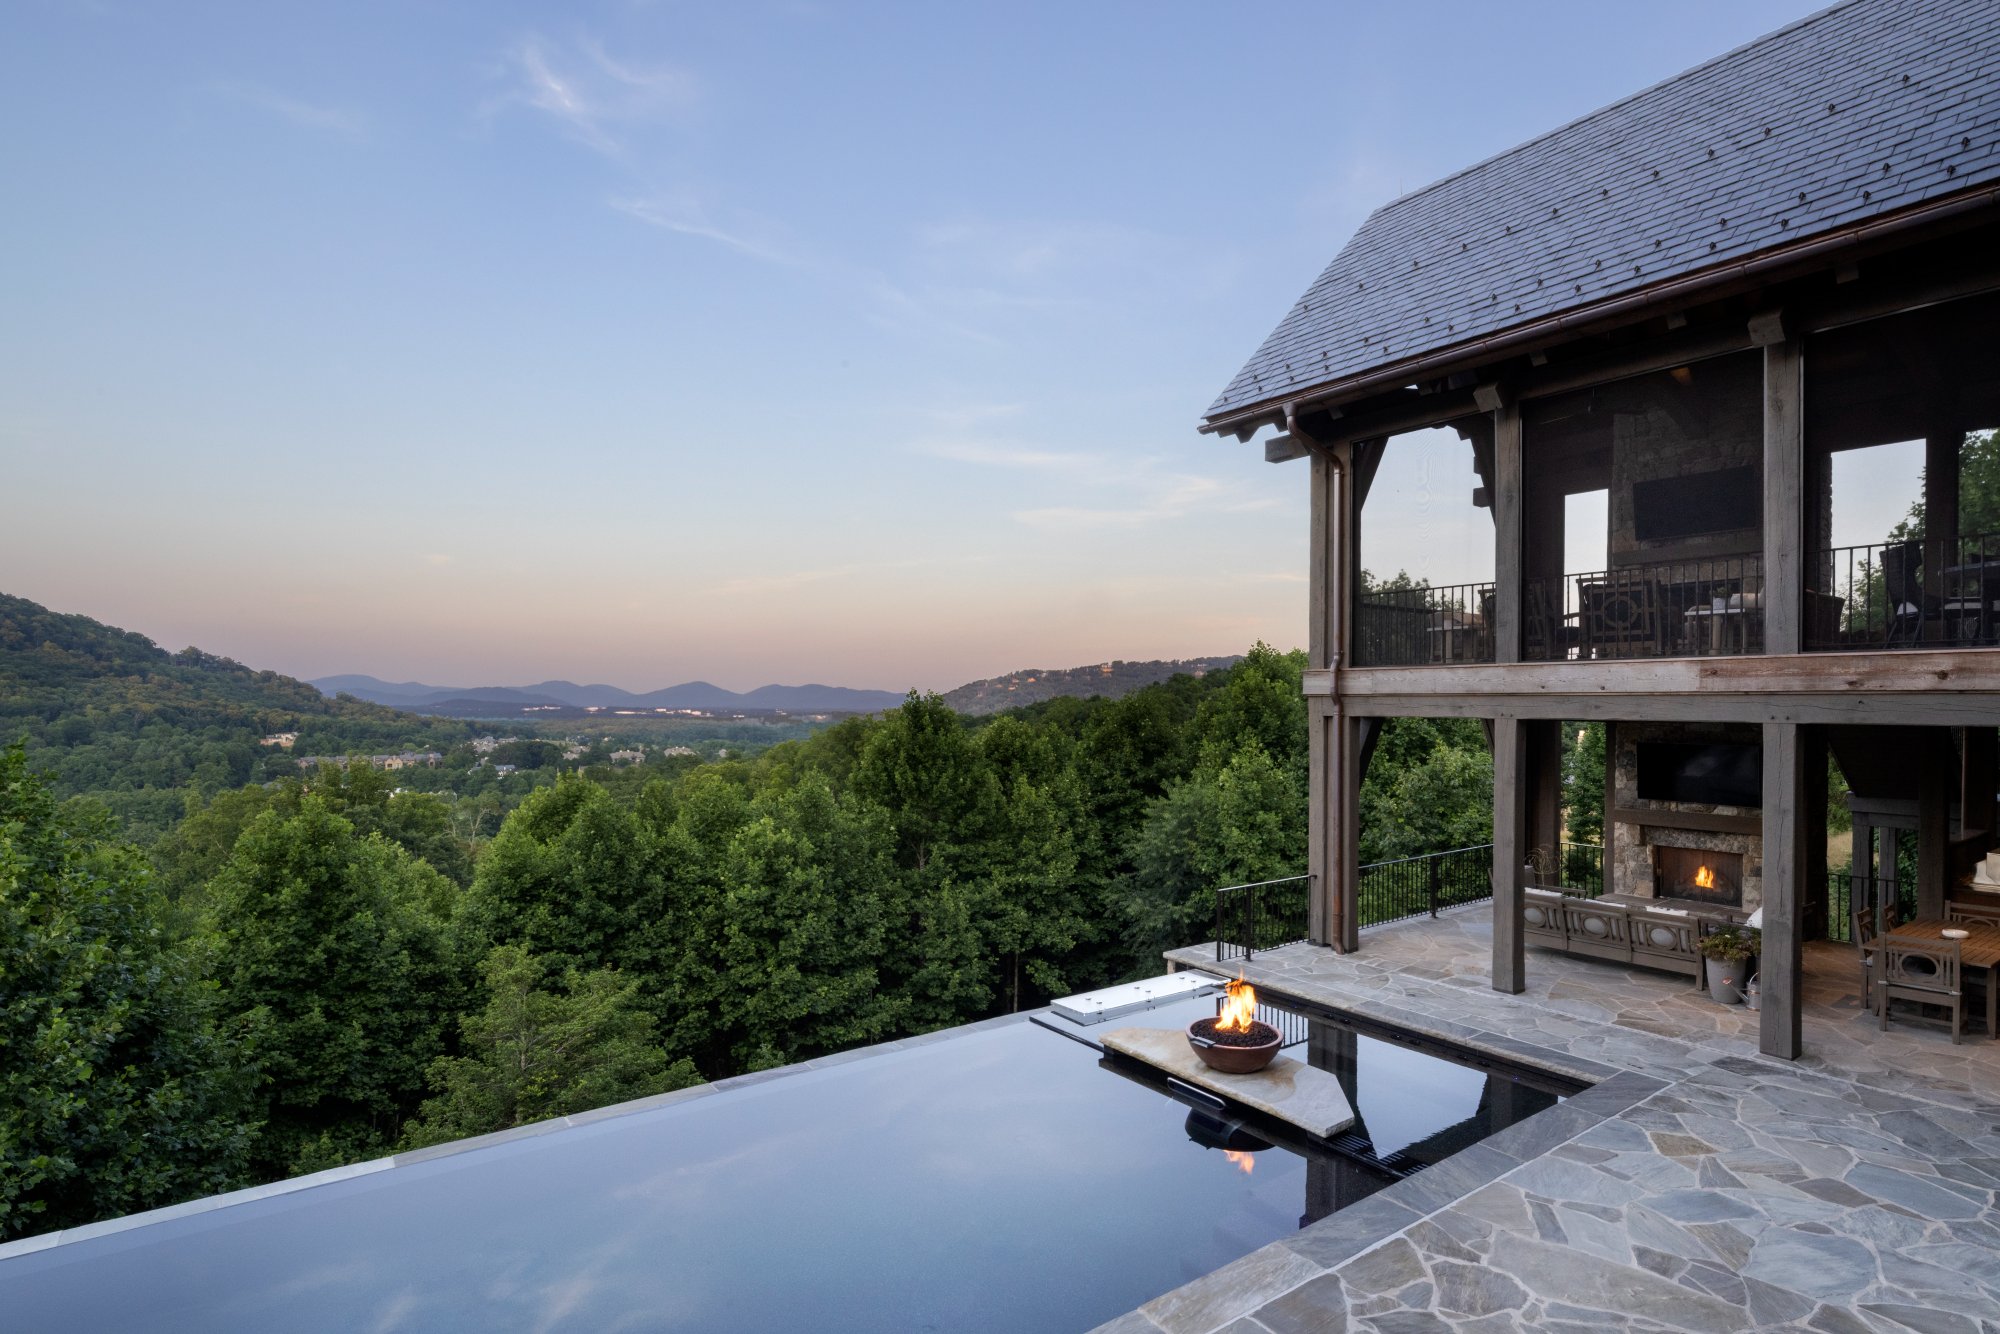 Infinity edge pool with fire bowl, outdoor screen porch with fireplace 